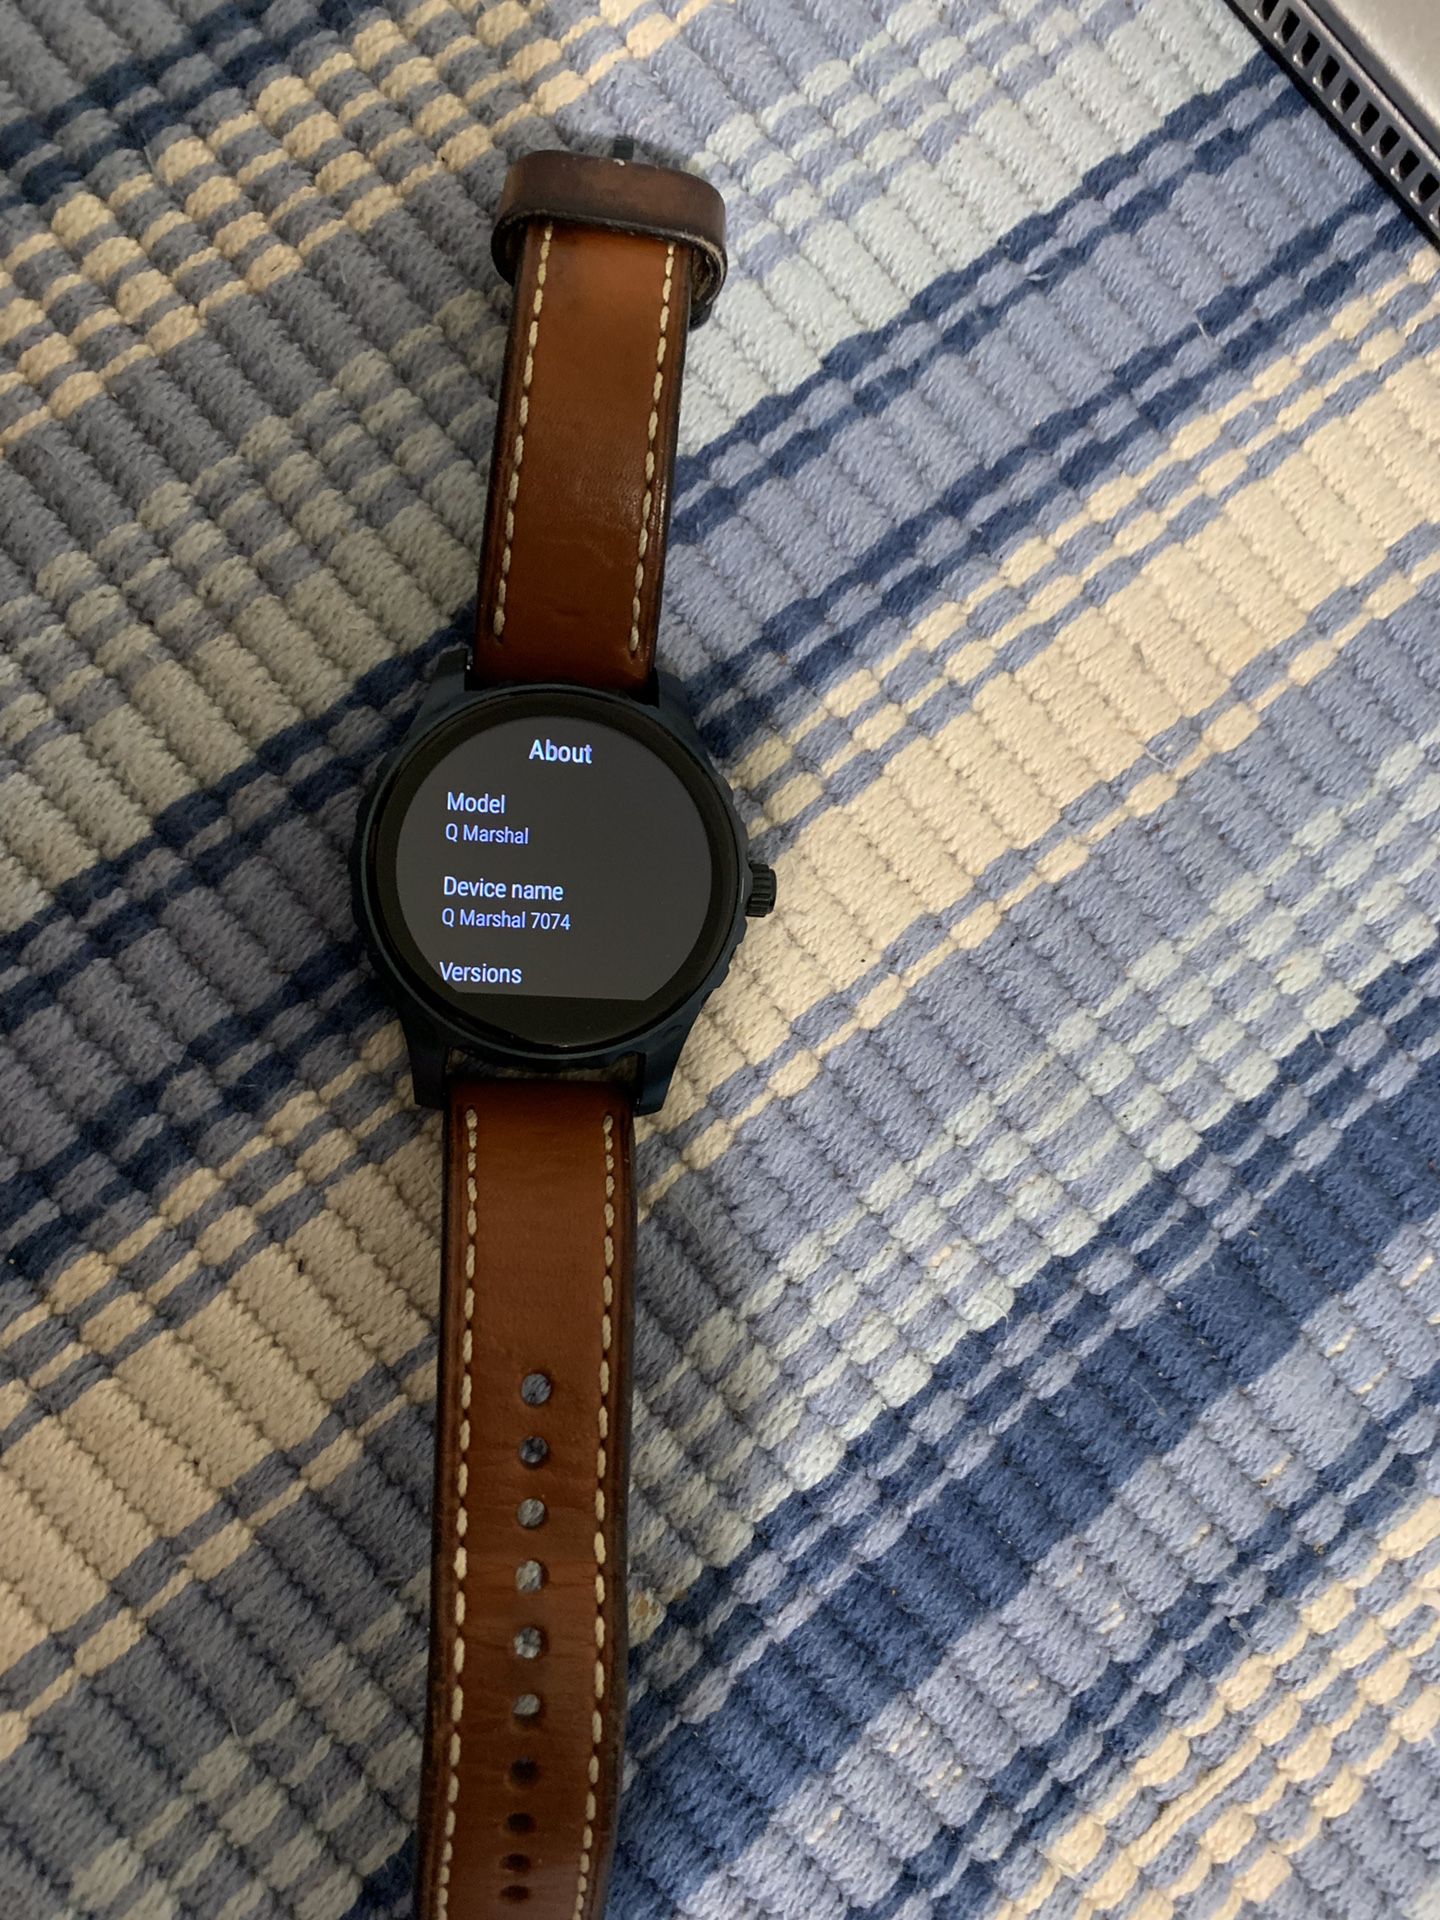 Fossil q founder for sale